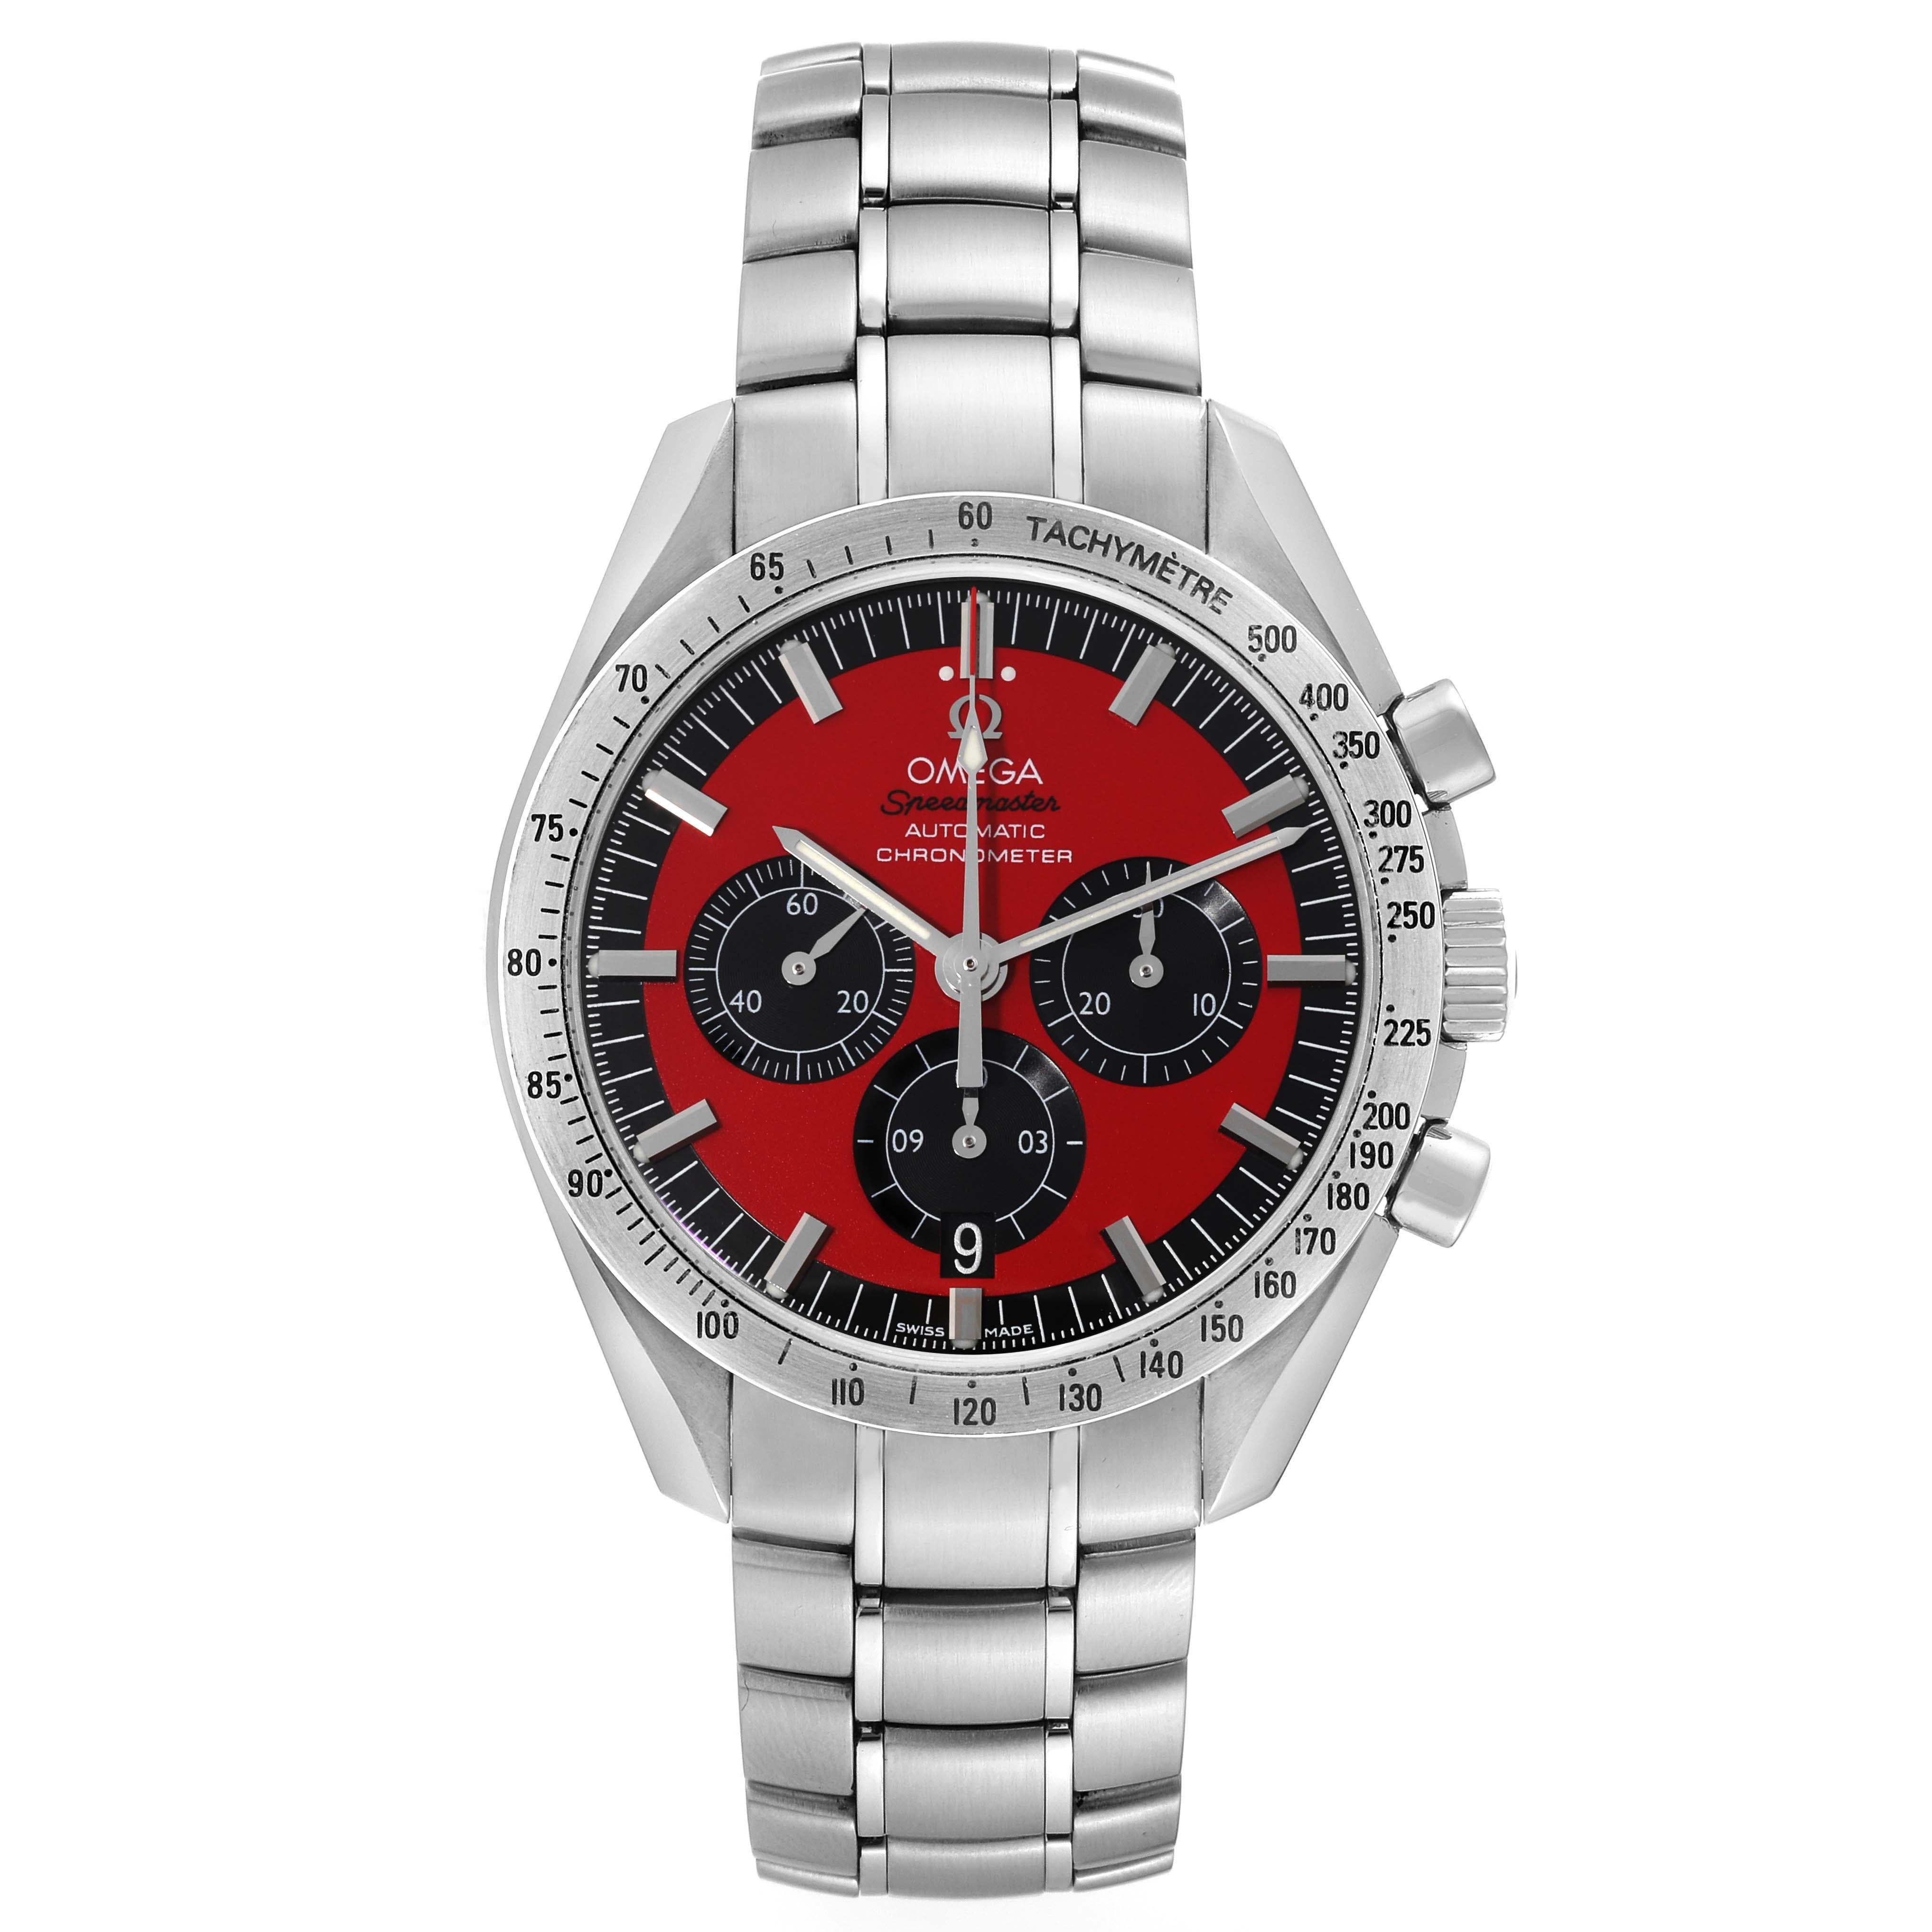 Omega Speedmaster Schumacher Legend Red Limited Edition Steel Mens Watch 3506.61.00. Automatic self-winding chronograph movement. Stainless steel round case 42.0 mm in diameter. Stainless steel bezel with tachymetre function. Scratch-resistant